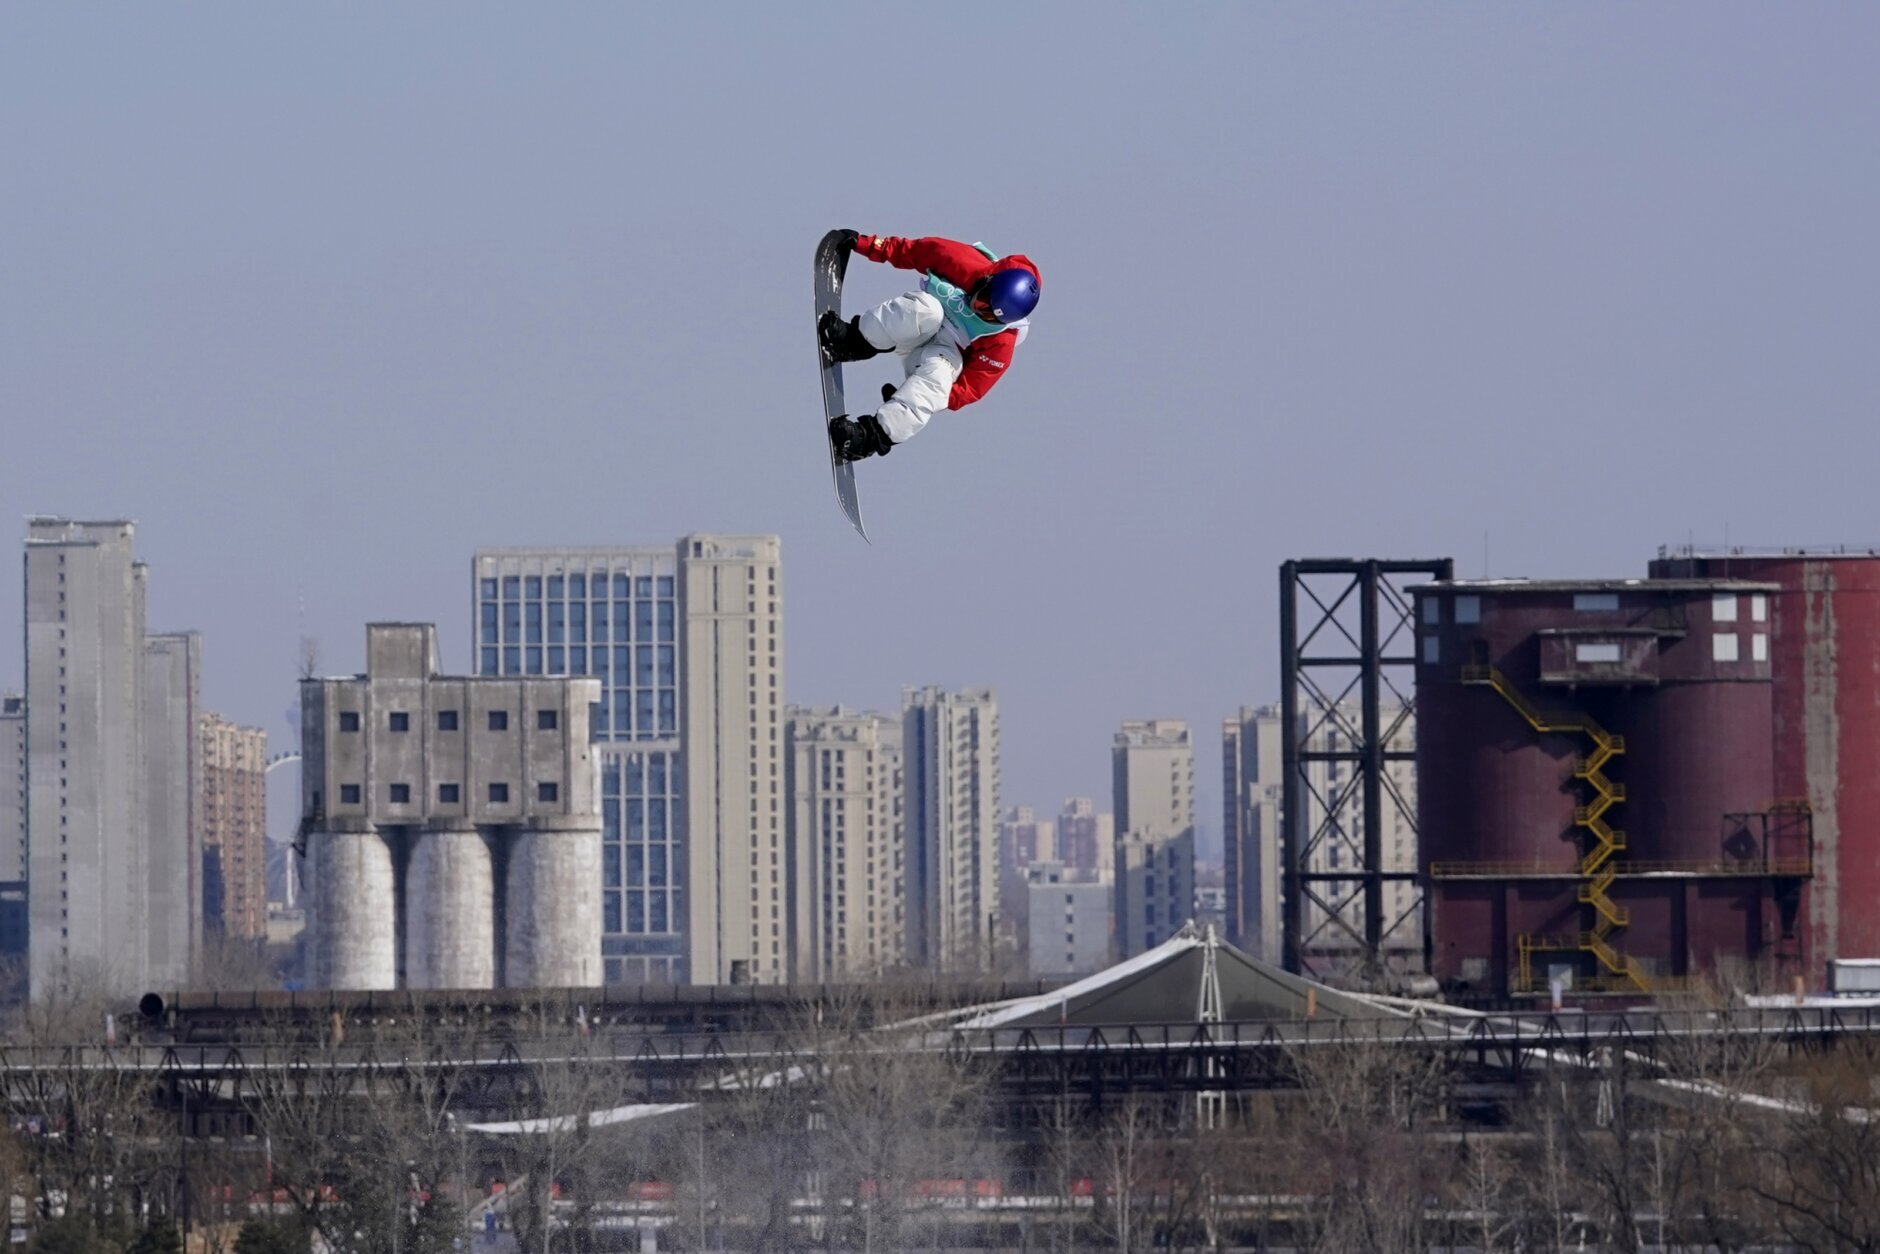 <p>Takeru Otsuka of Japan competes during the men&#8217;s snowboard big air finals of the 2022 Winter Olympics, Tuesday, Feb. 15, 2022, in Beijing.</p>
